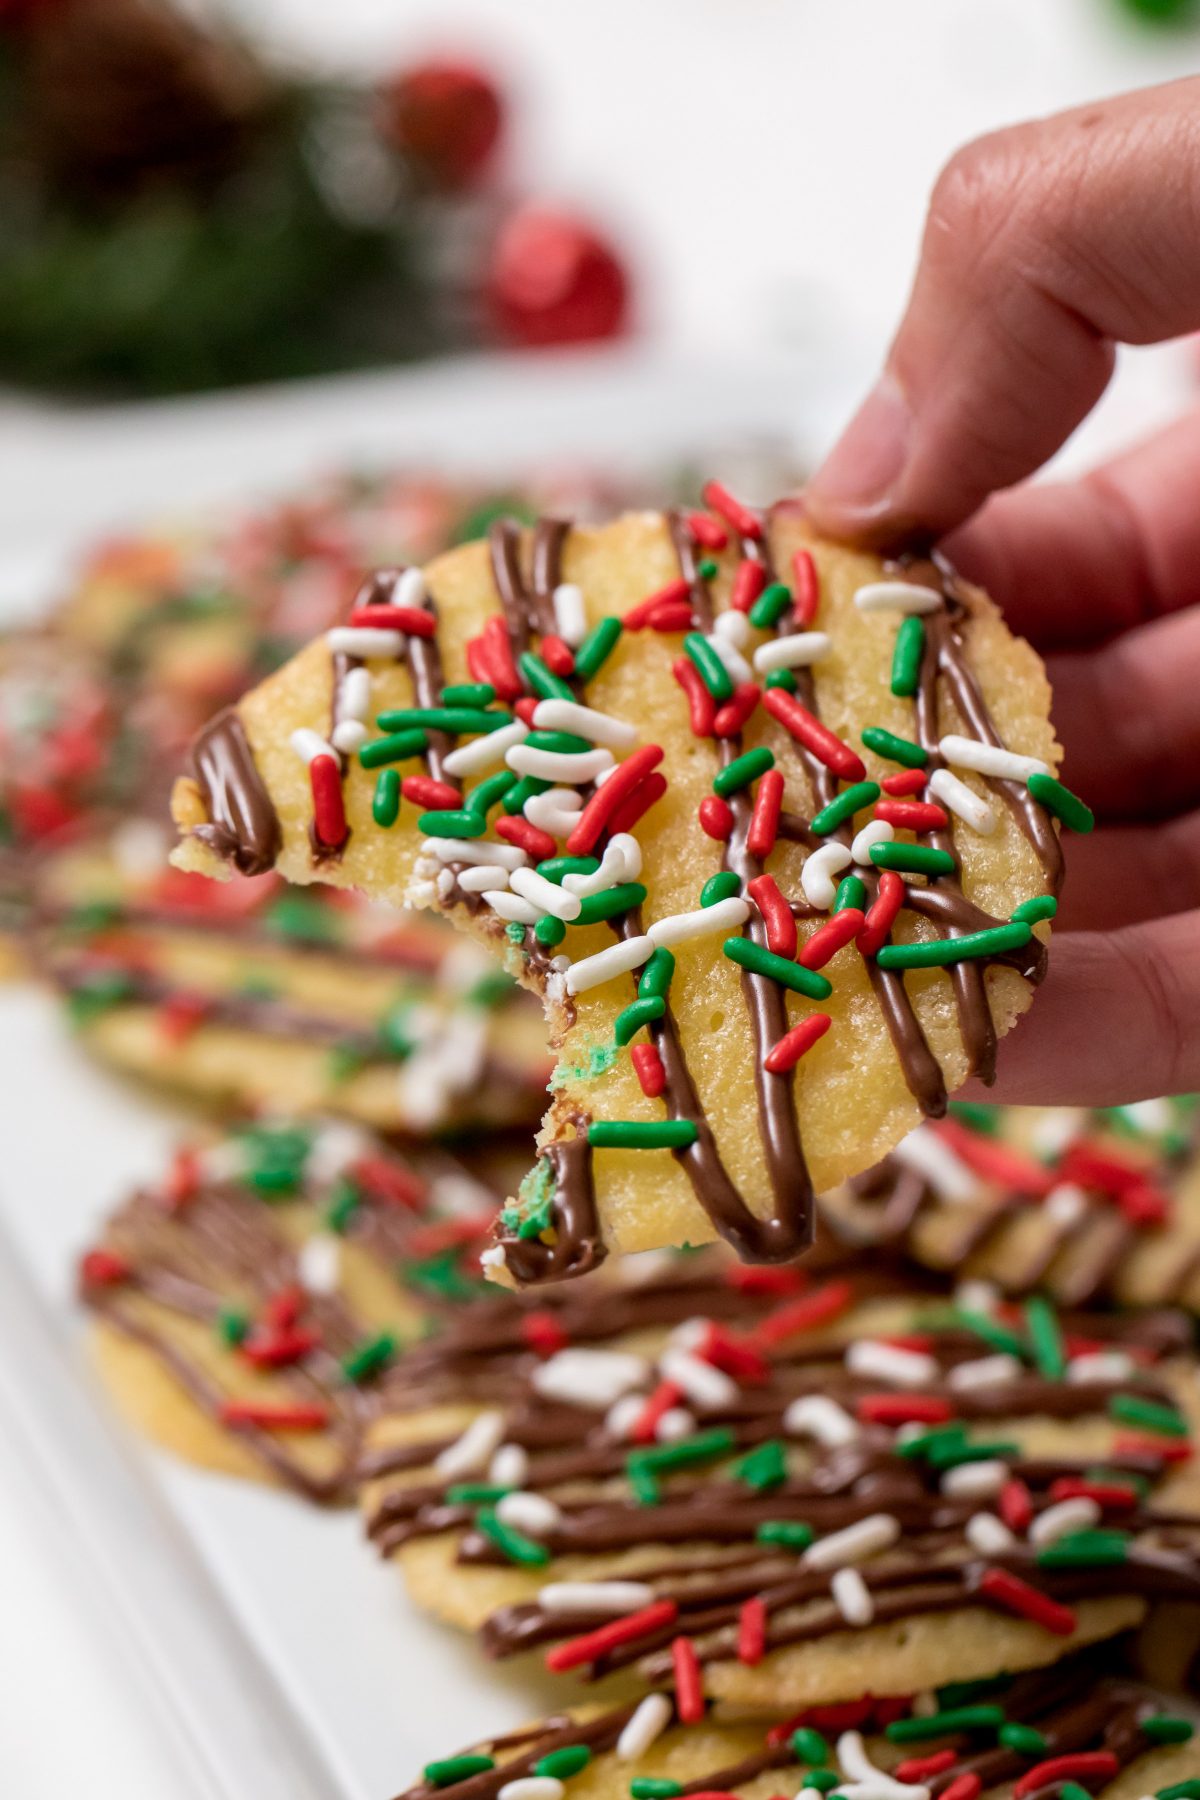 5D4B7081 - Chocolate Drizzled Christmas Cookies with Holiday Jimmies